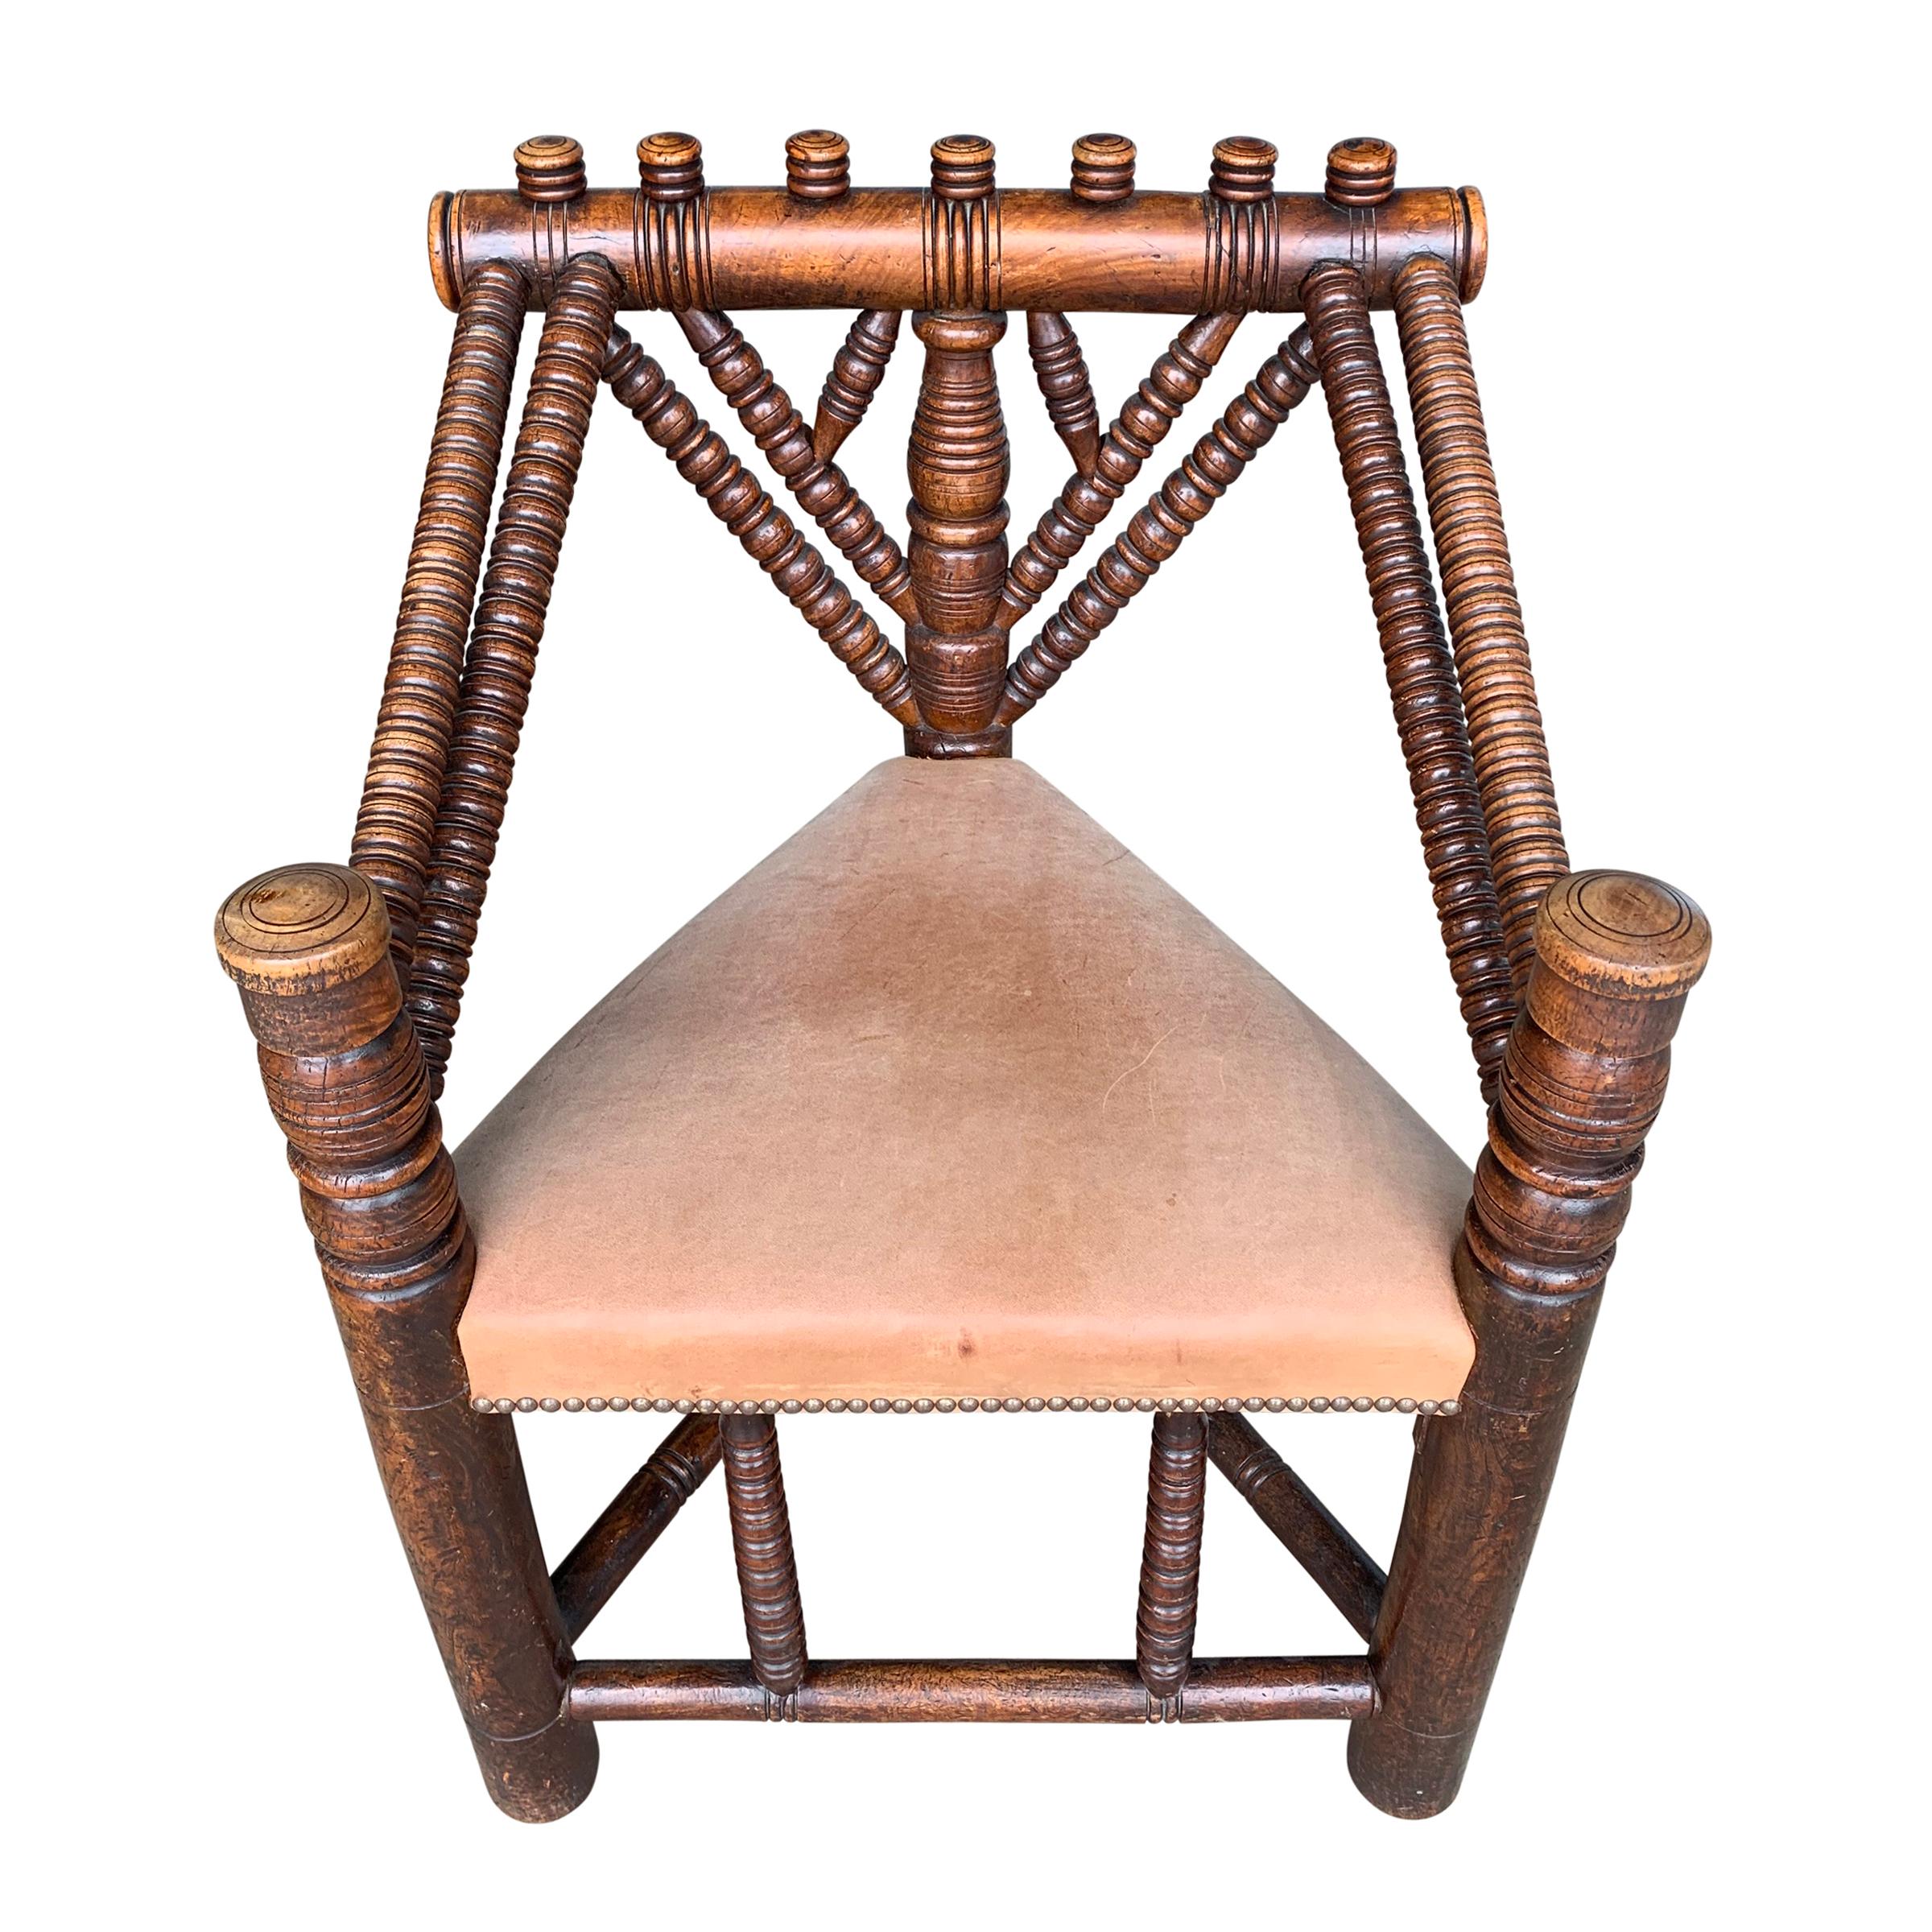 An incredible 18th century English Turner's chair created to show off the talents of a skilled wood turner, with a triangle seat upholstered in a smooth natural leather with nailhead trim, and a wonderful patina.